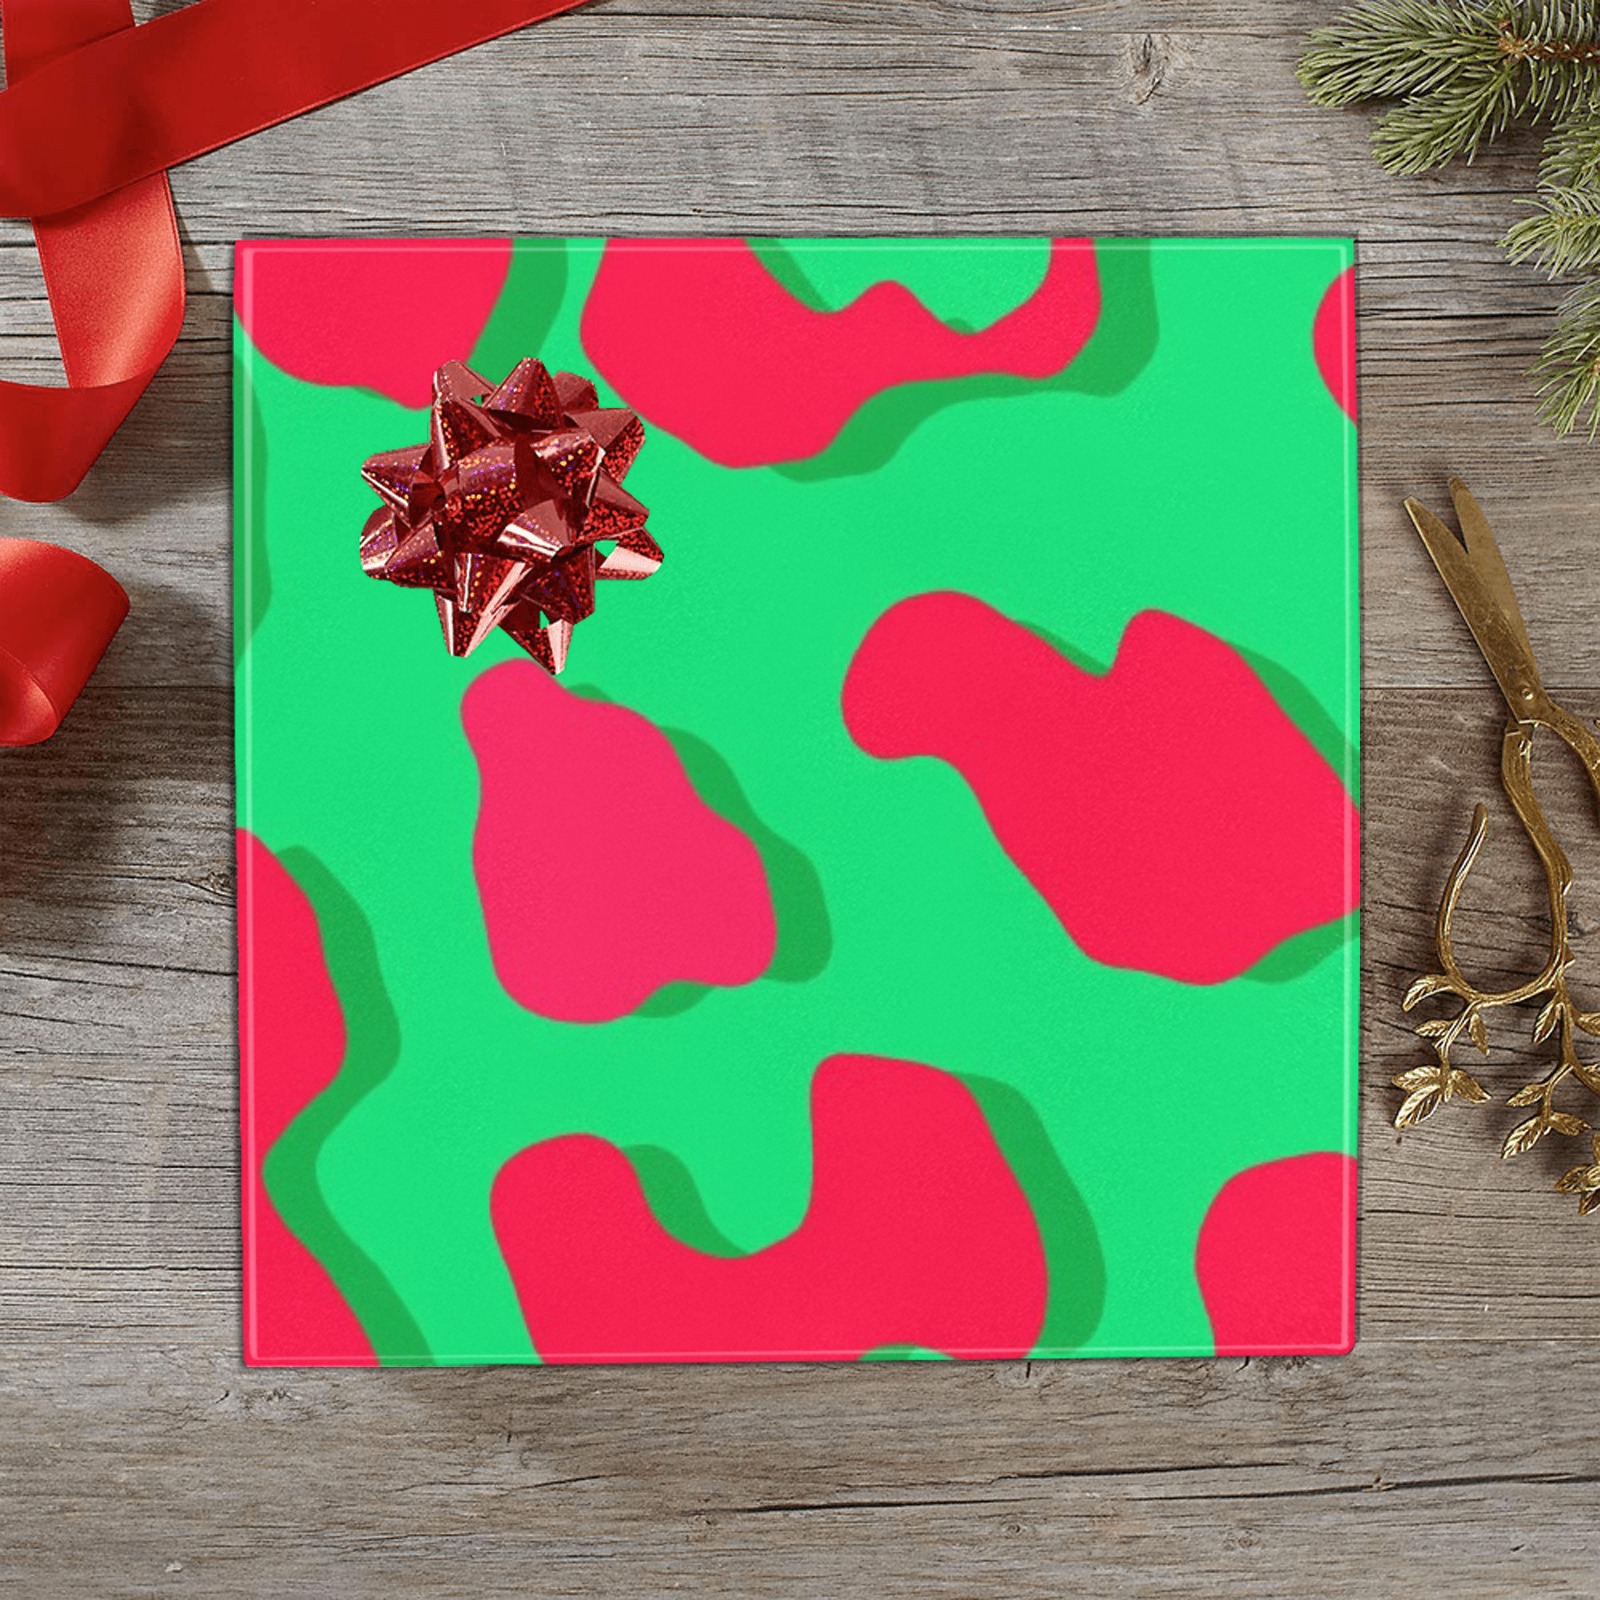 Leopard Print Red Green Gift Wrapping Paper 58"x 23" (1 Roll)